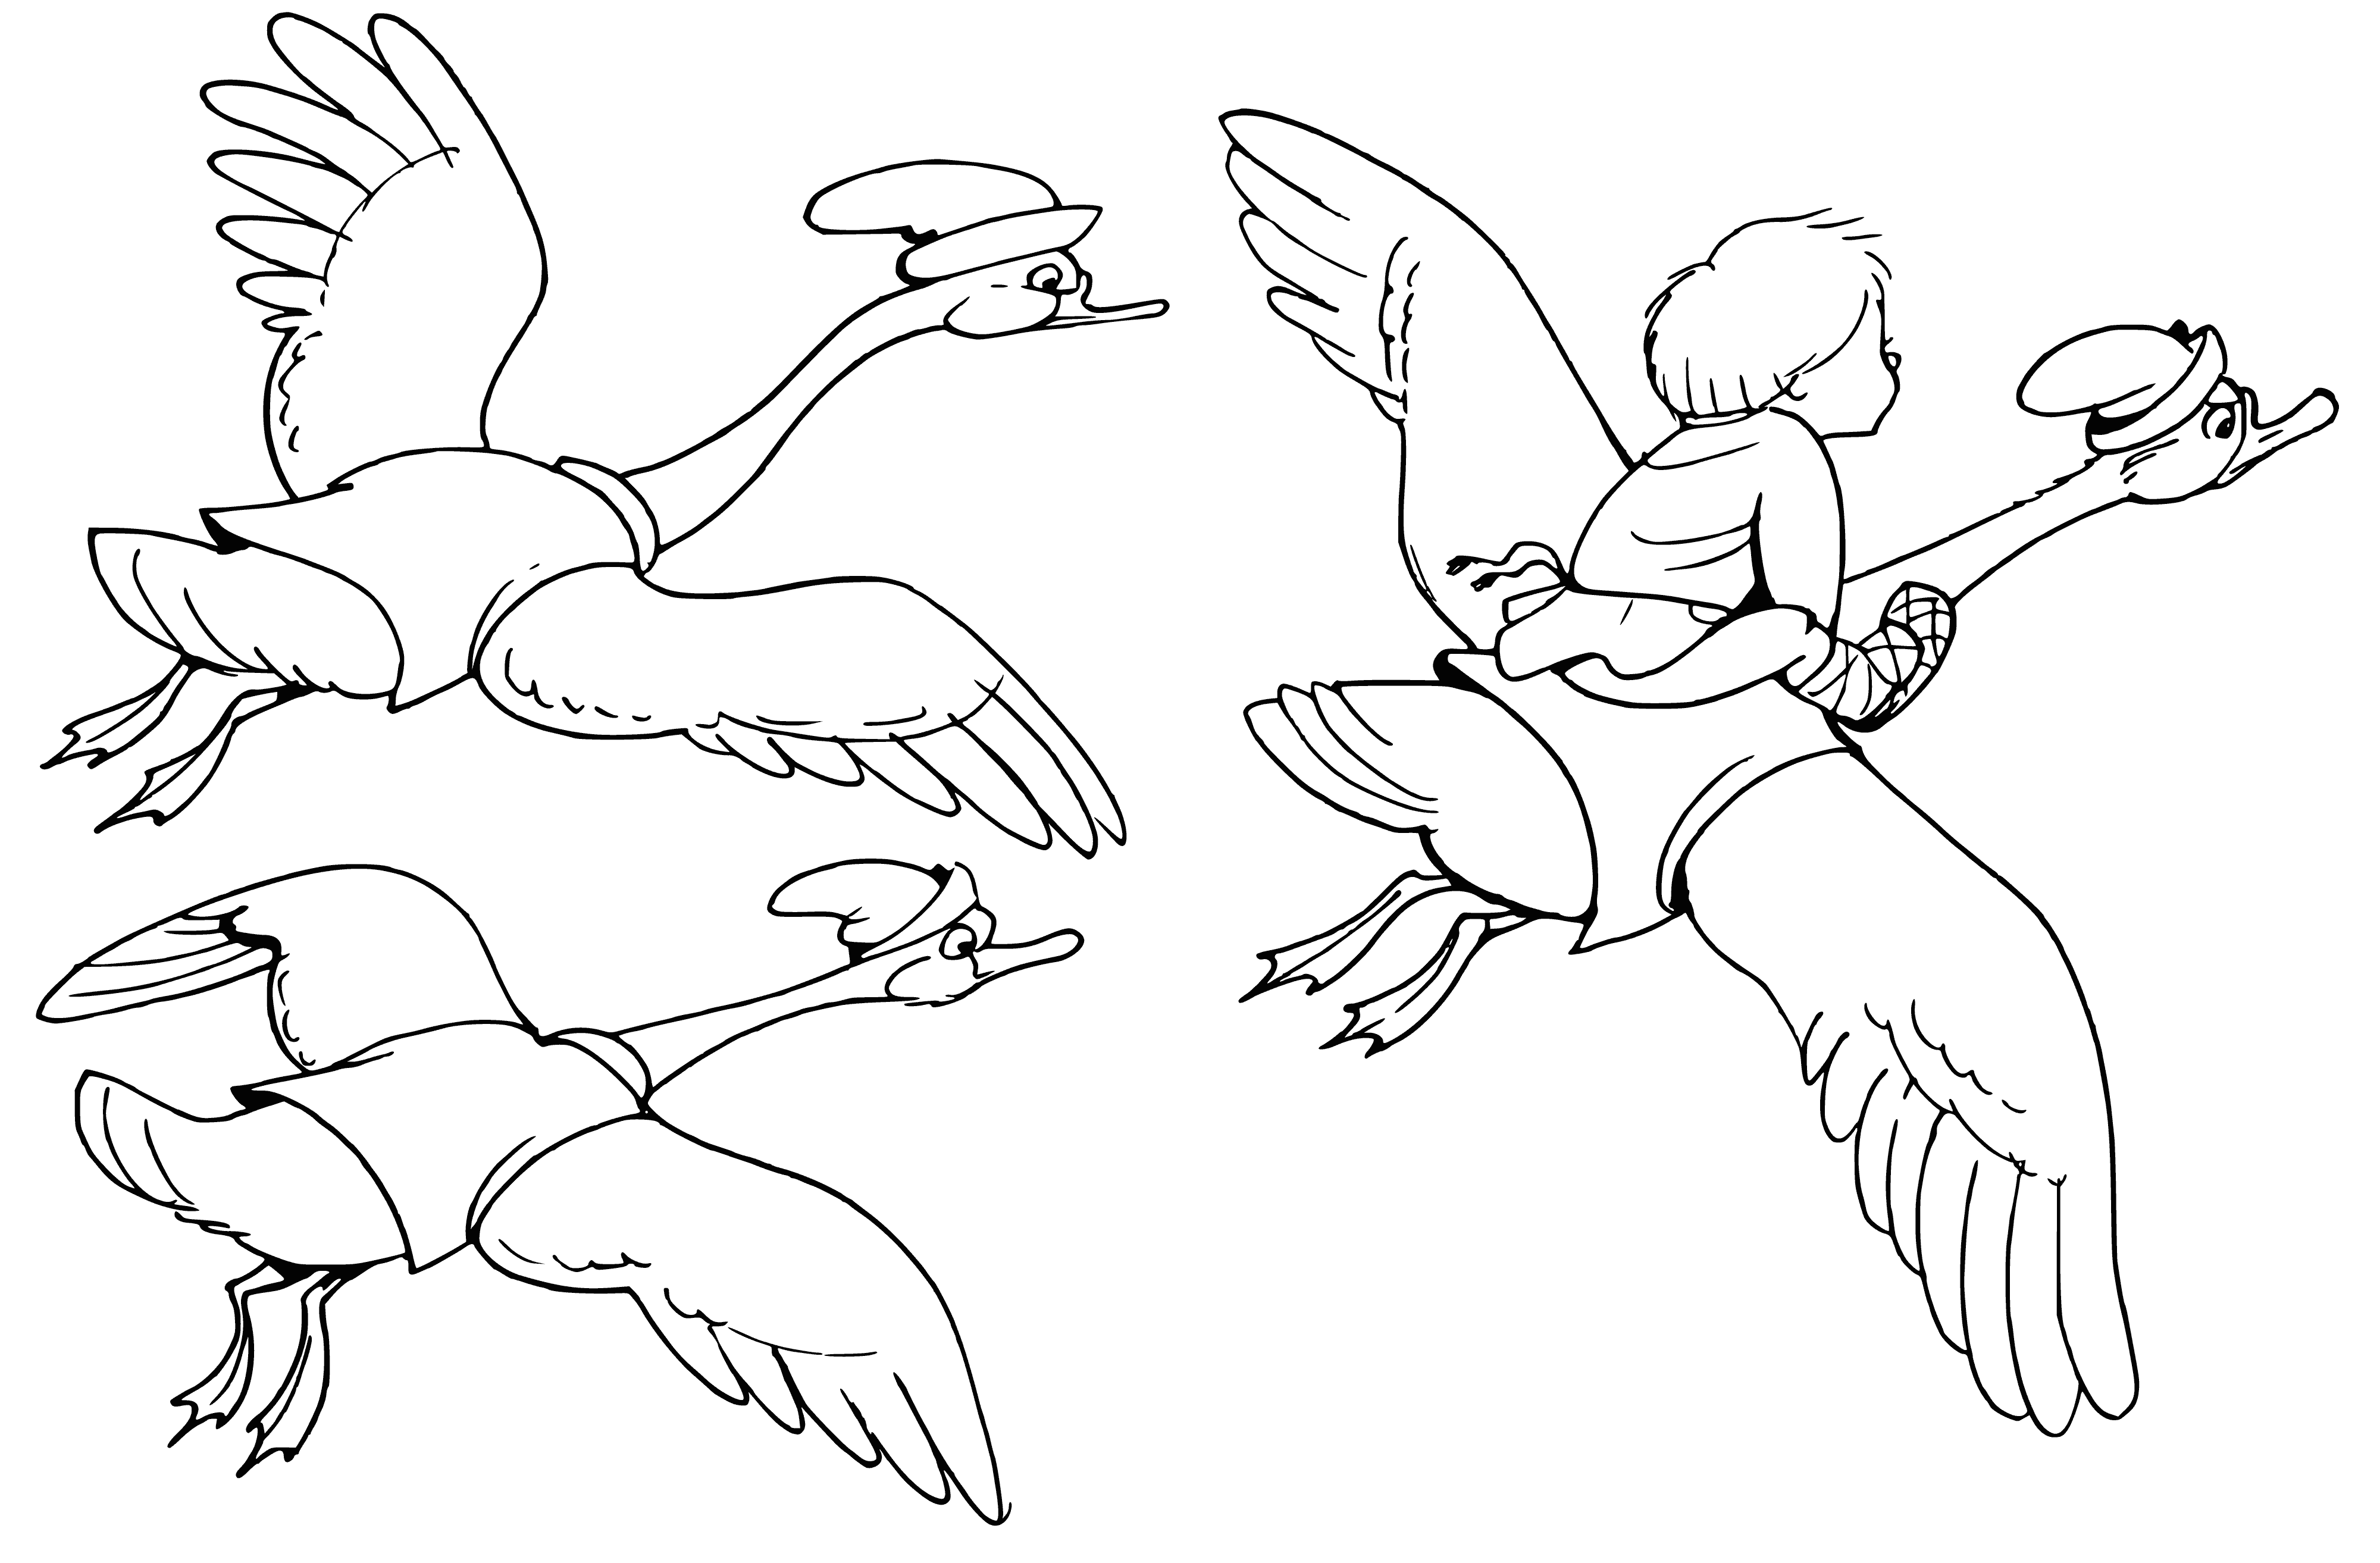 coloring page: Group of geese flies away with boy in their beaks. Boy looks scared and reaches out, needing help. #scarysituation